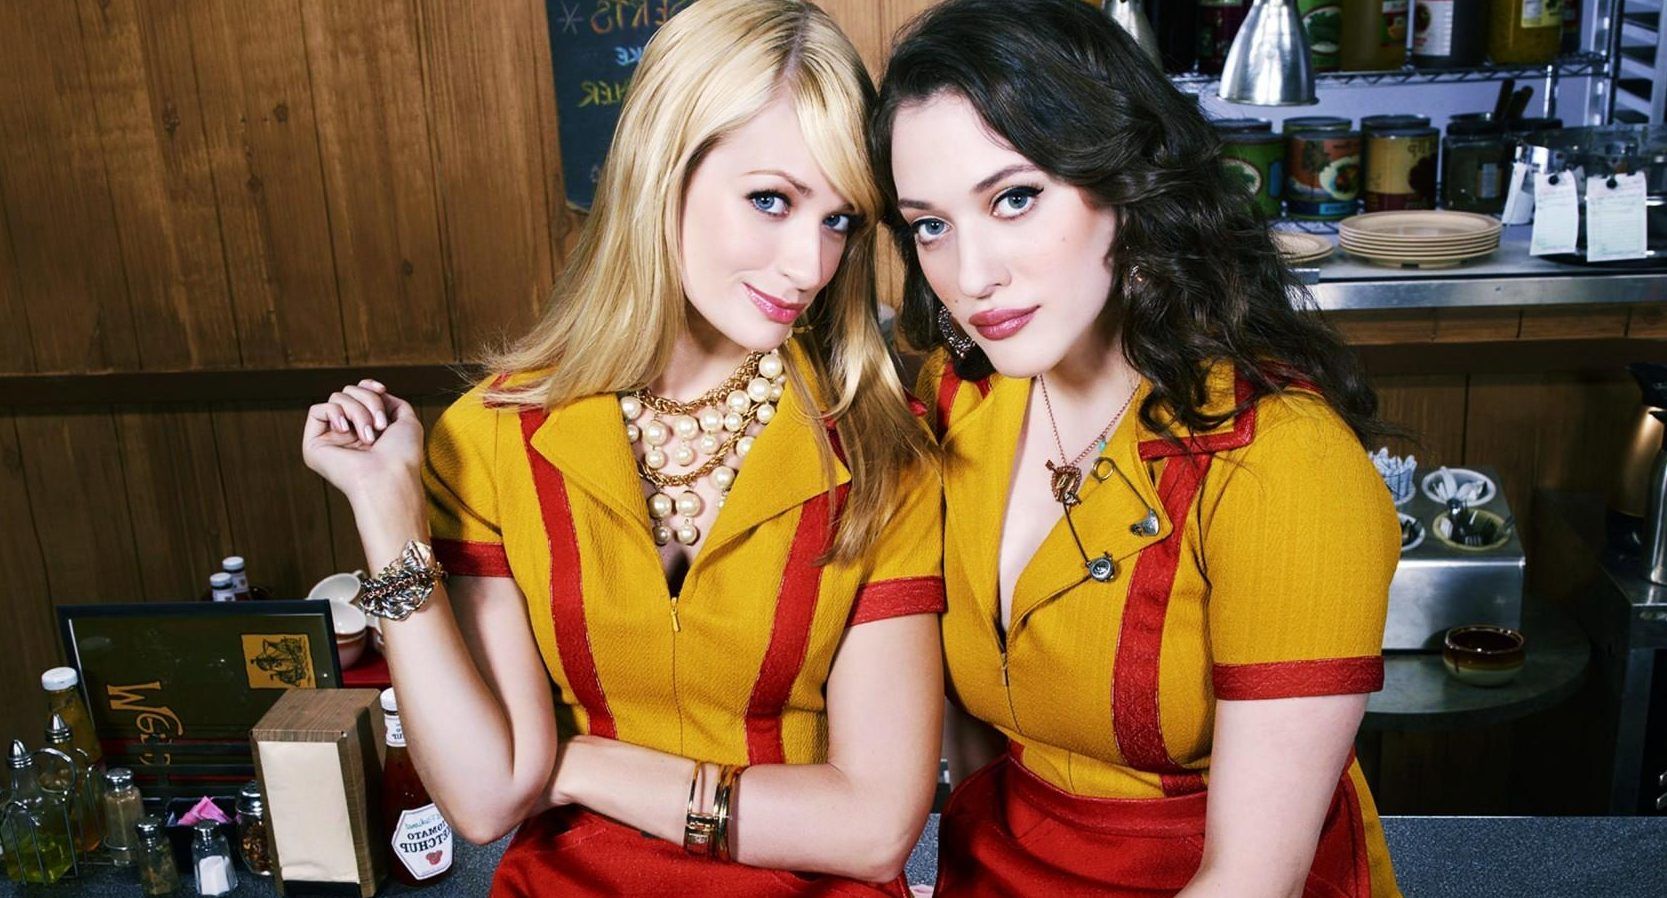 2 Broke Girls: 20 Photos Of Max And Caroline We Can't Stop Looking At